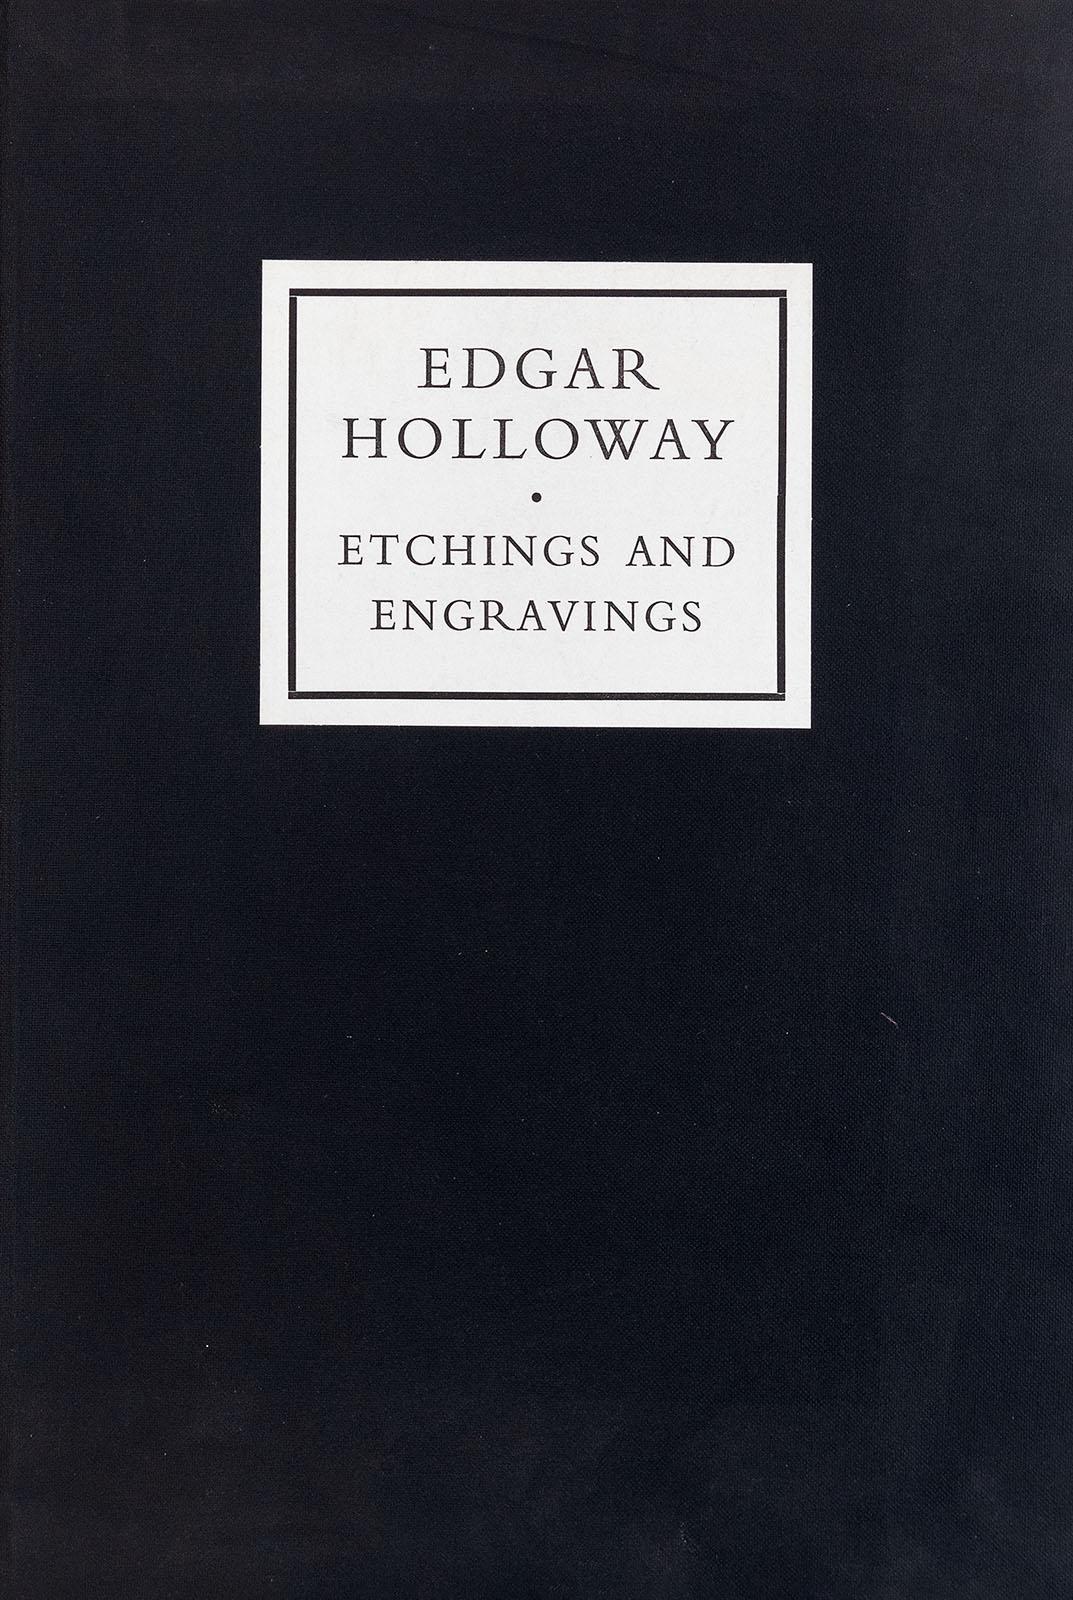 Folio of 6 signed etchings and engravings by Edgar Holloway - Print by Edgar A. Holloway